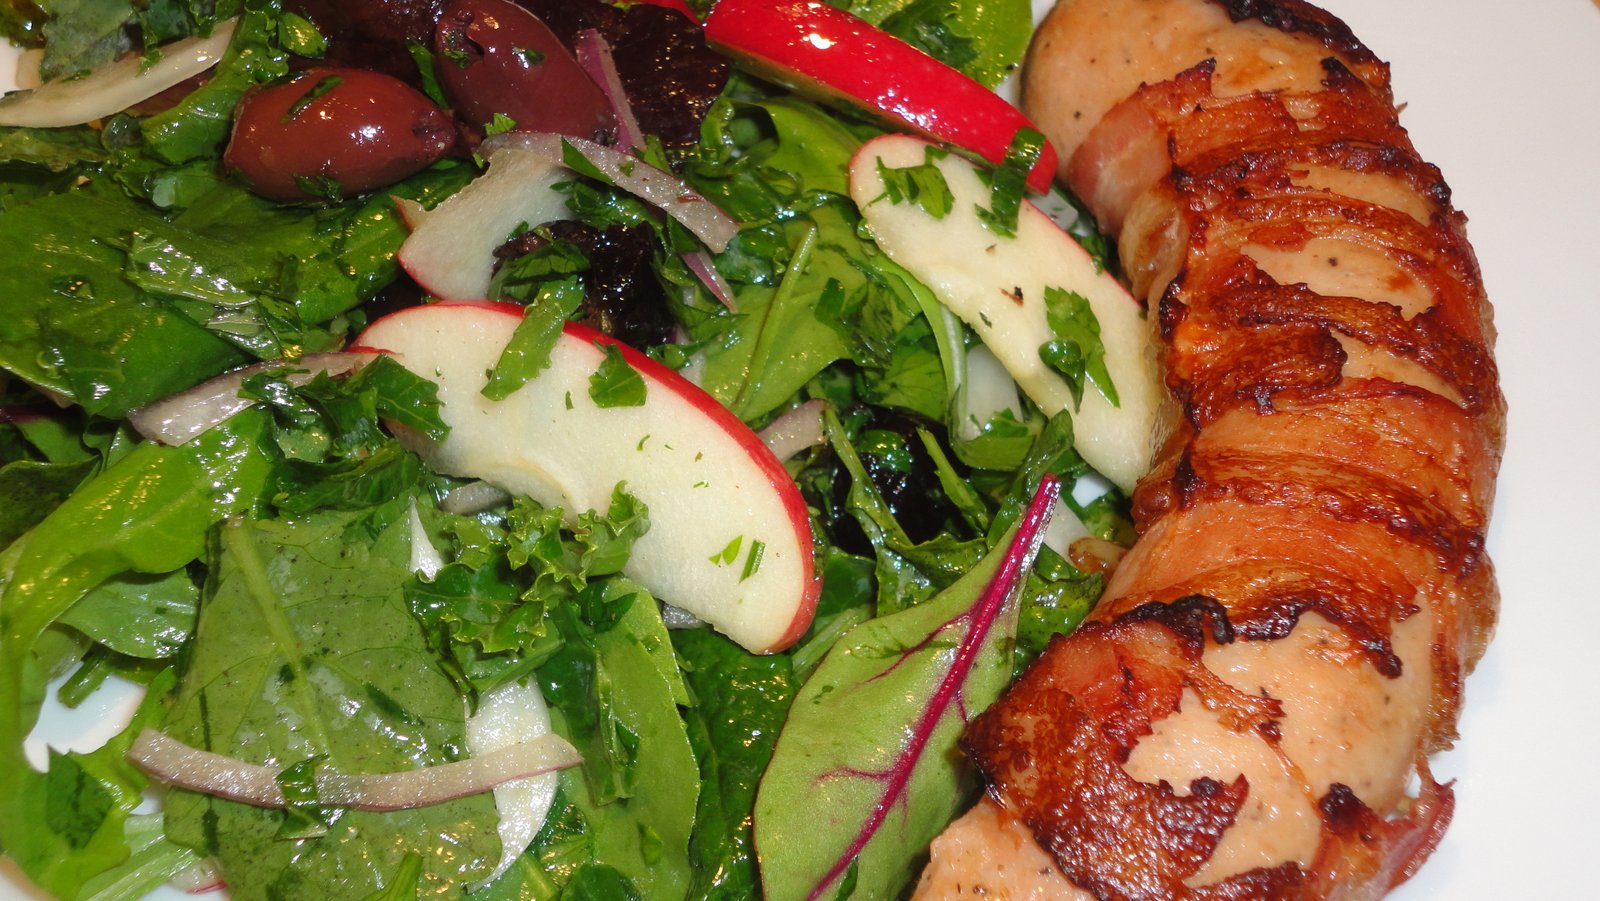 Recipe #3 | Bacon Wrapped Chicken Sausage With Apple Kale Salad